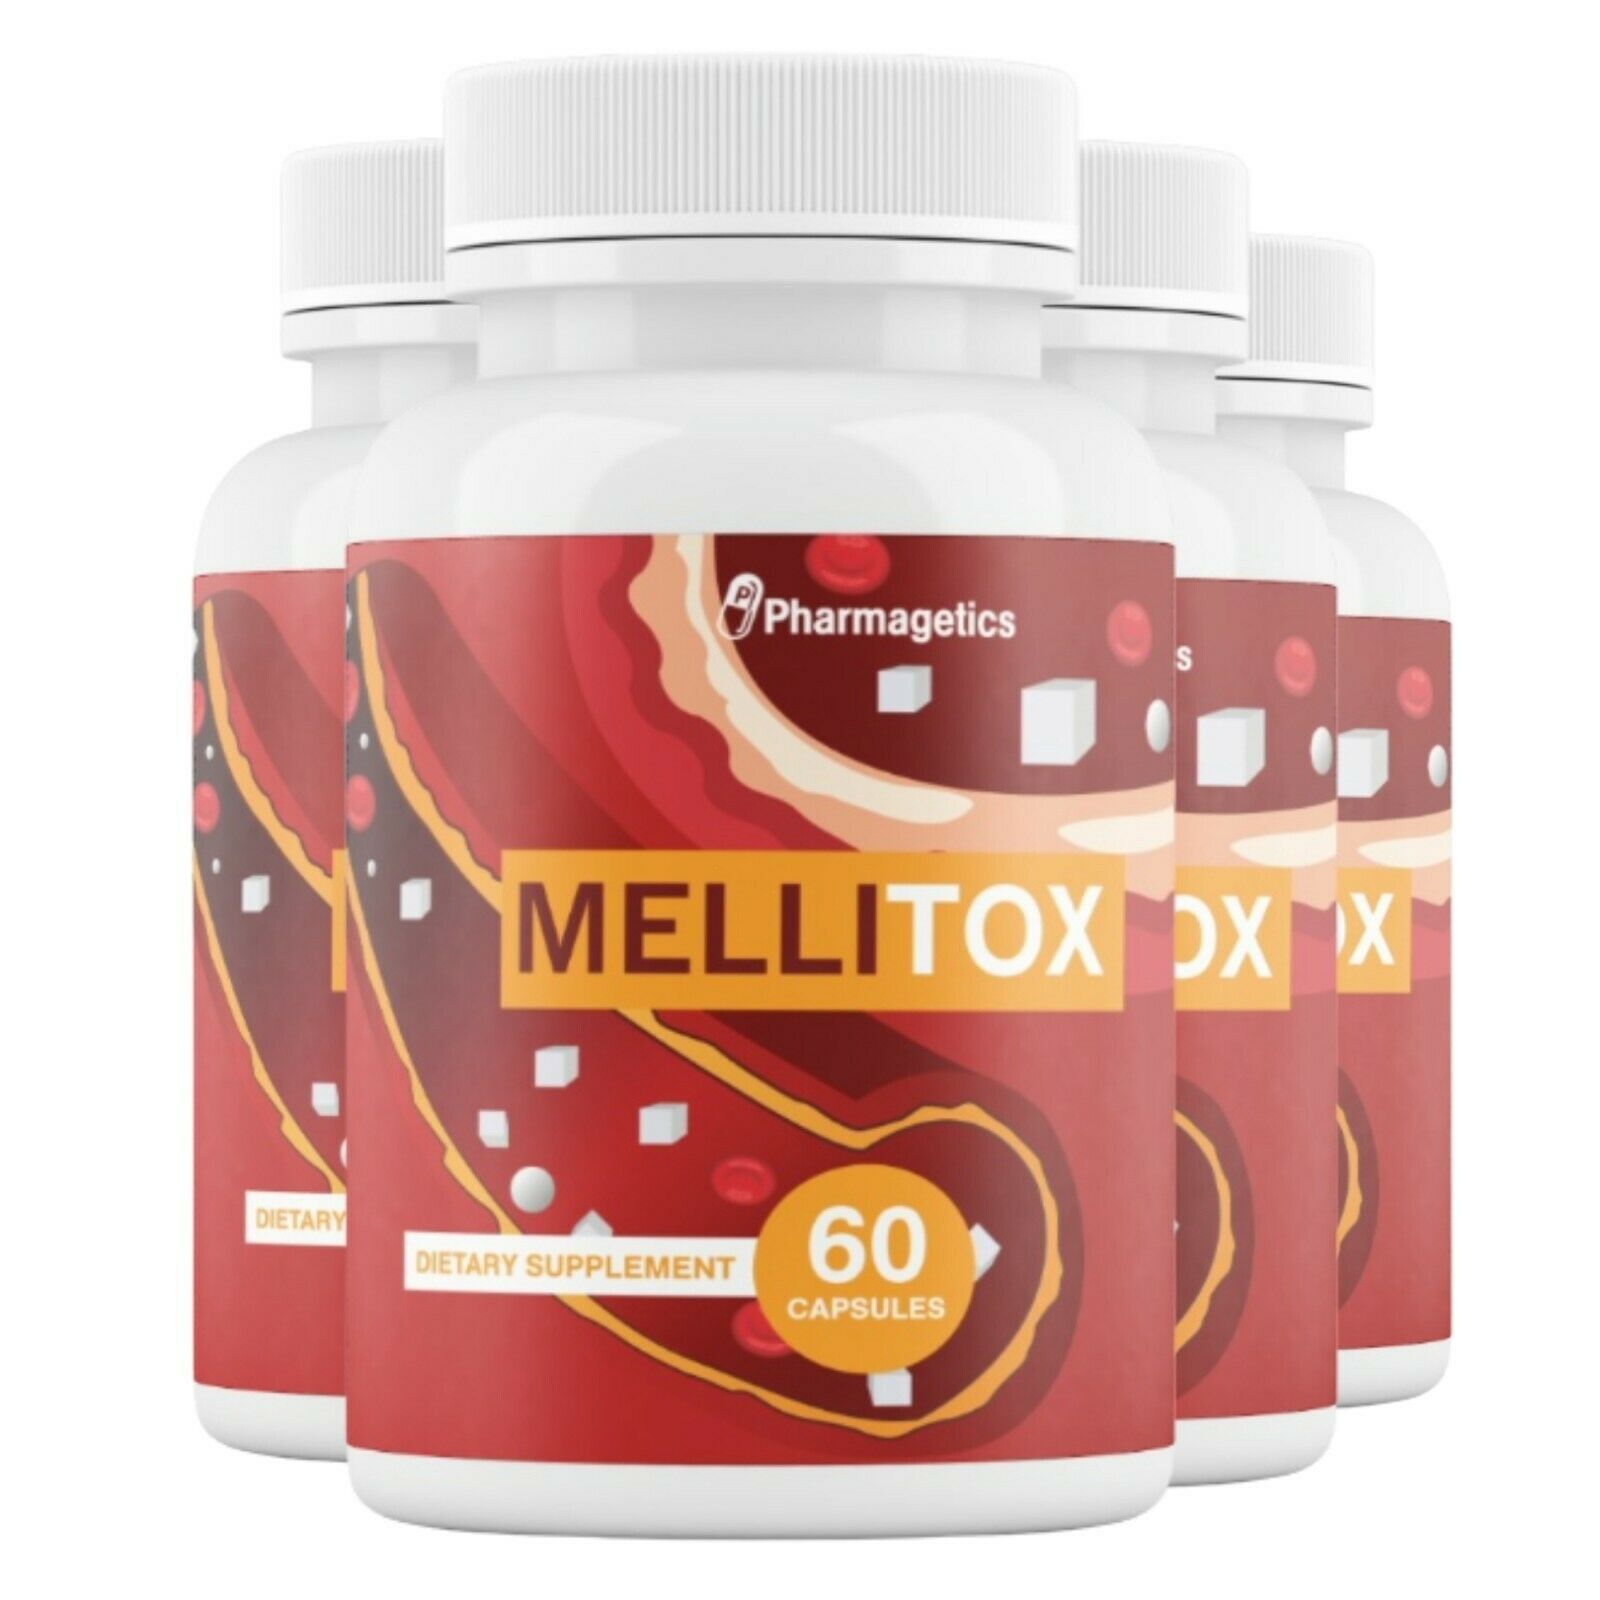 4 Mellitox Blood Sugar Support  - 4 Bottles 240 Capsules